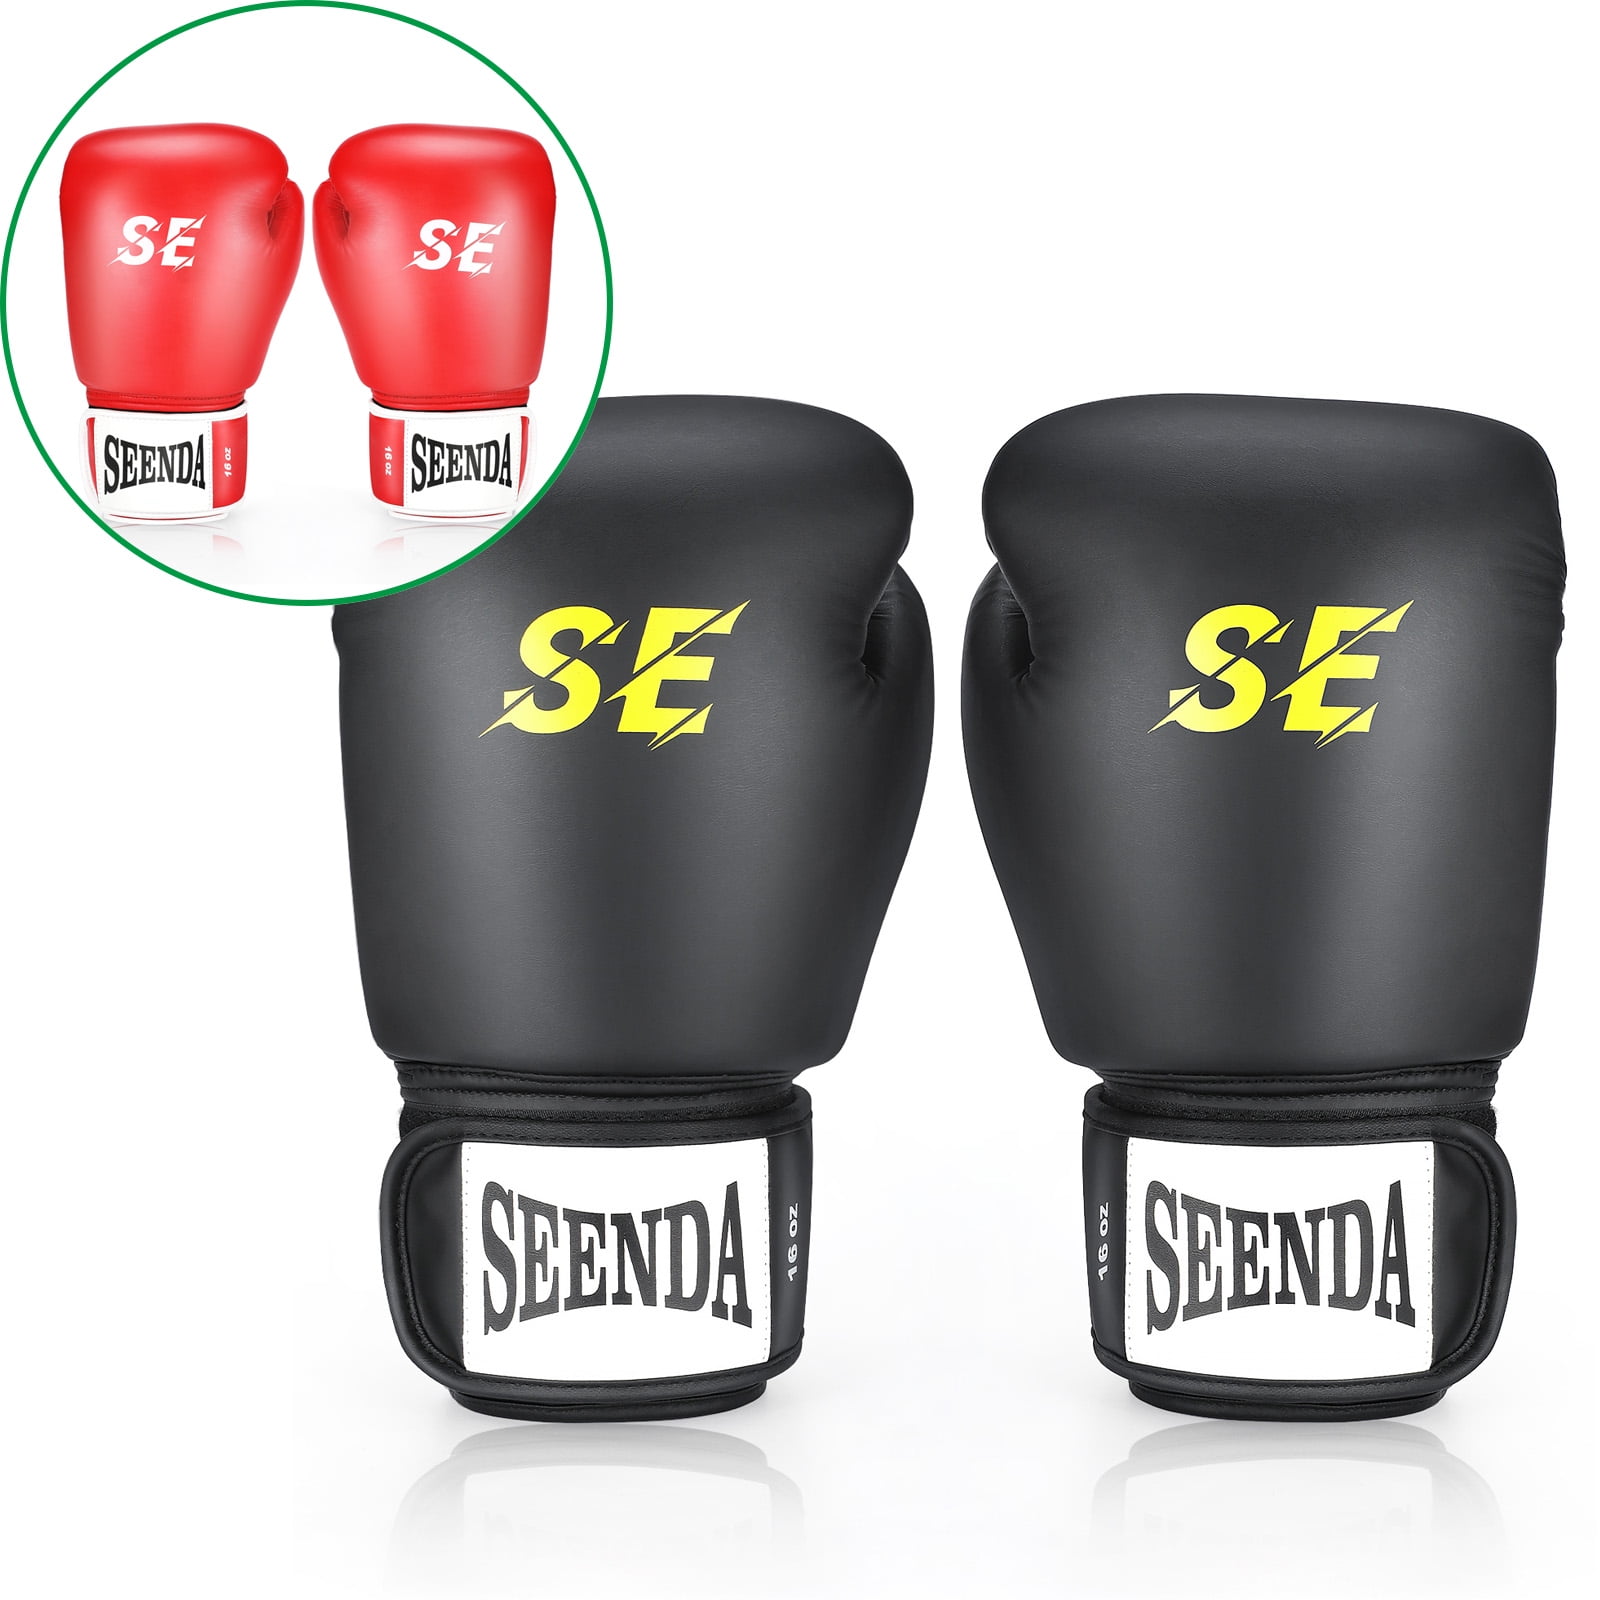 BOXING SPARRING GLOVES PUNCH BAG FIGHT GYM TRAINING MMA MUAY THI MITT KICKBOXING